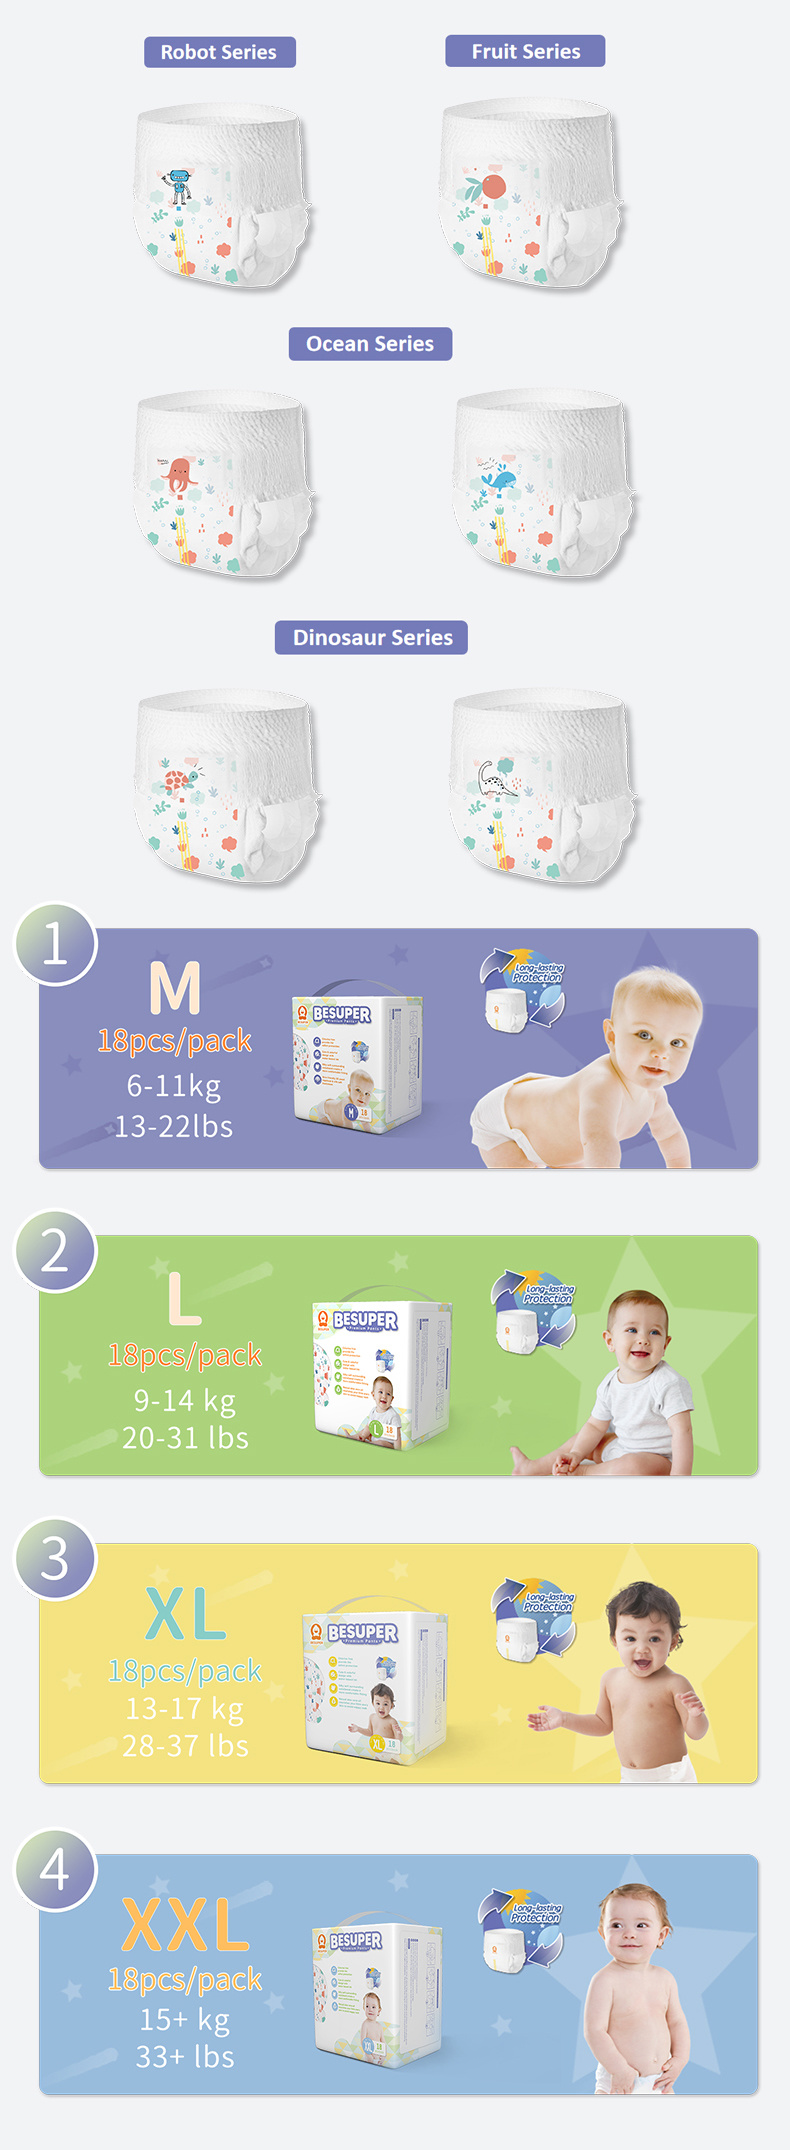 Professional Manufacture of Various Sizes of Professional Soft Baby Diapers